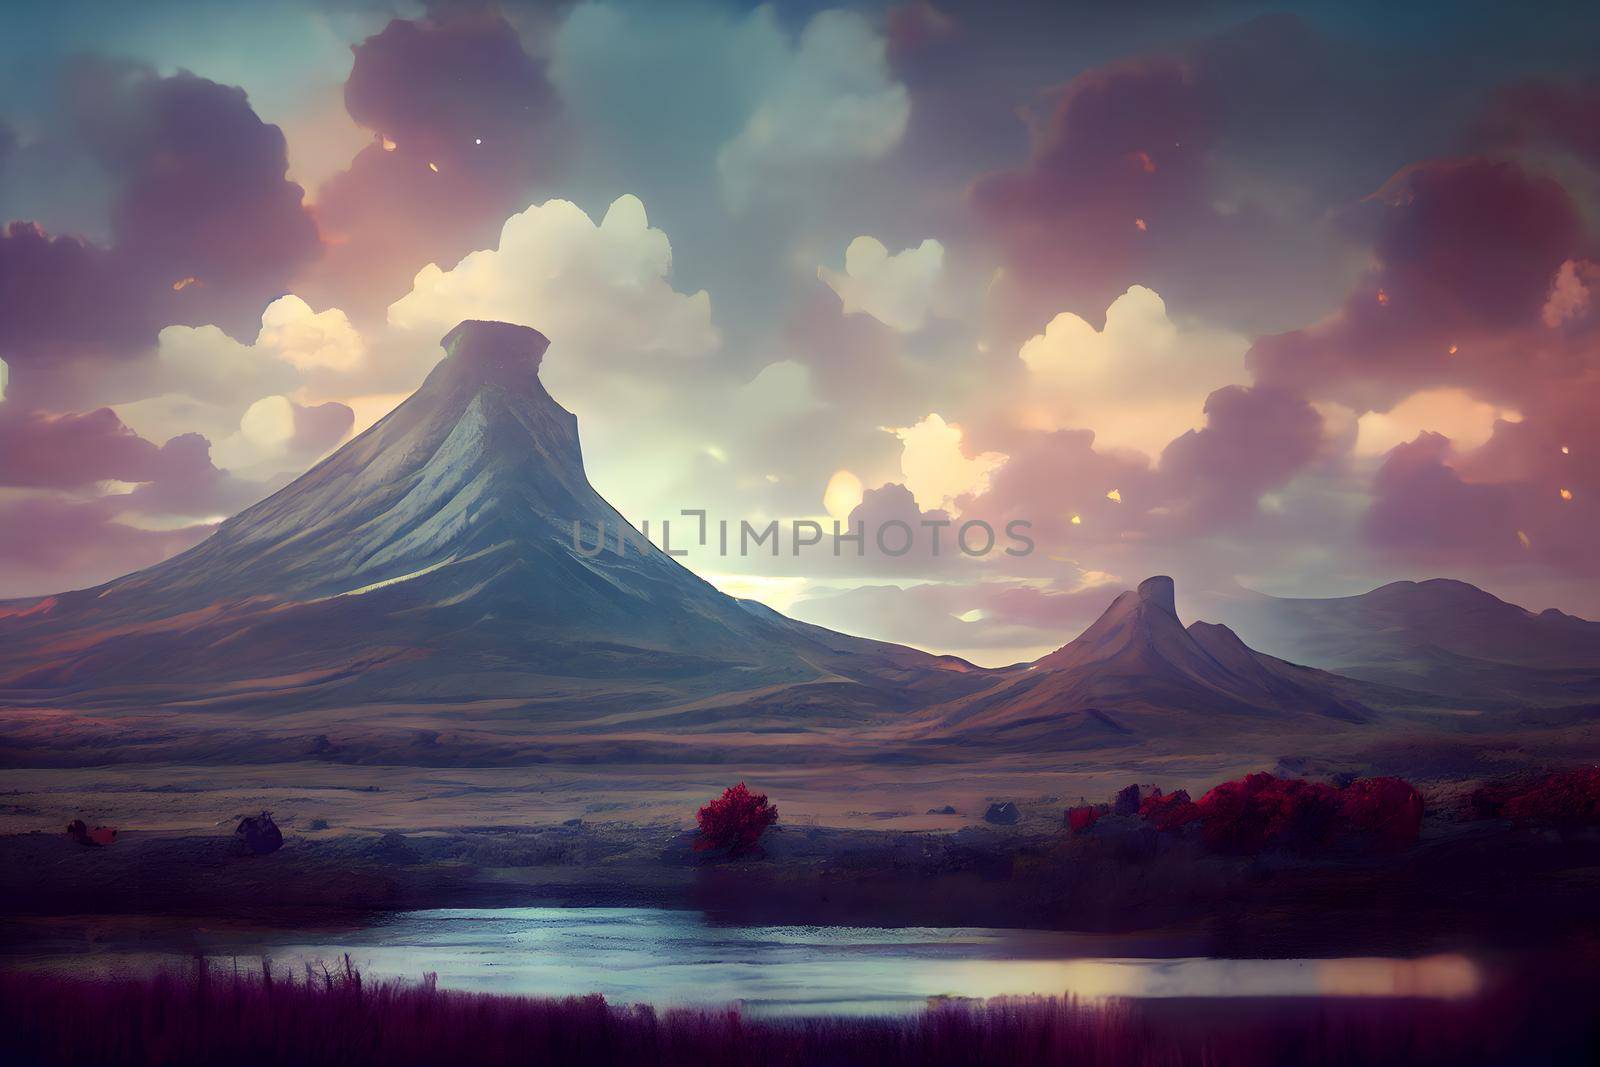 dreamy anime style summer wilderness landscape with mesa mountains , neural network generated art by z1b